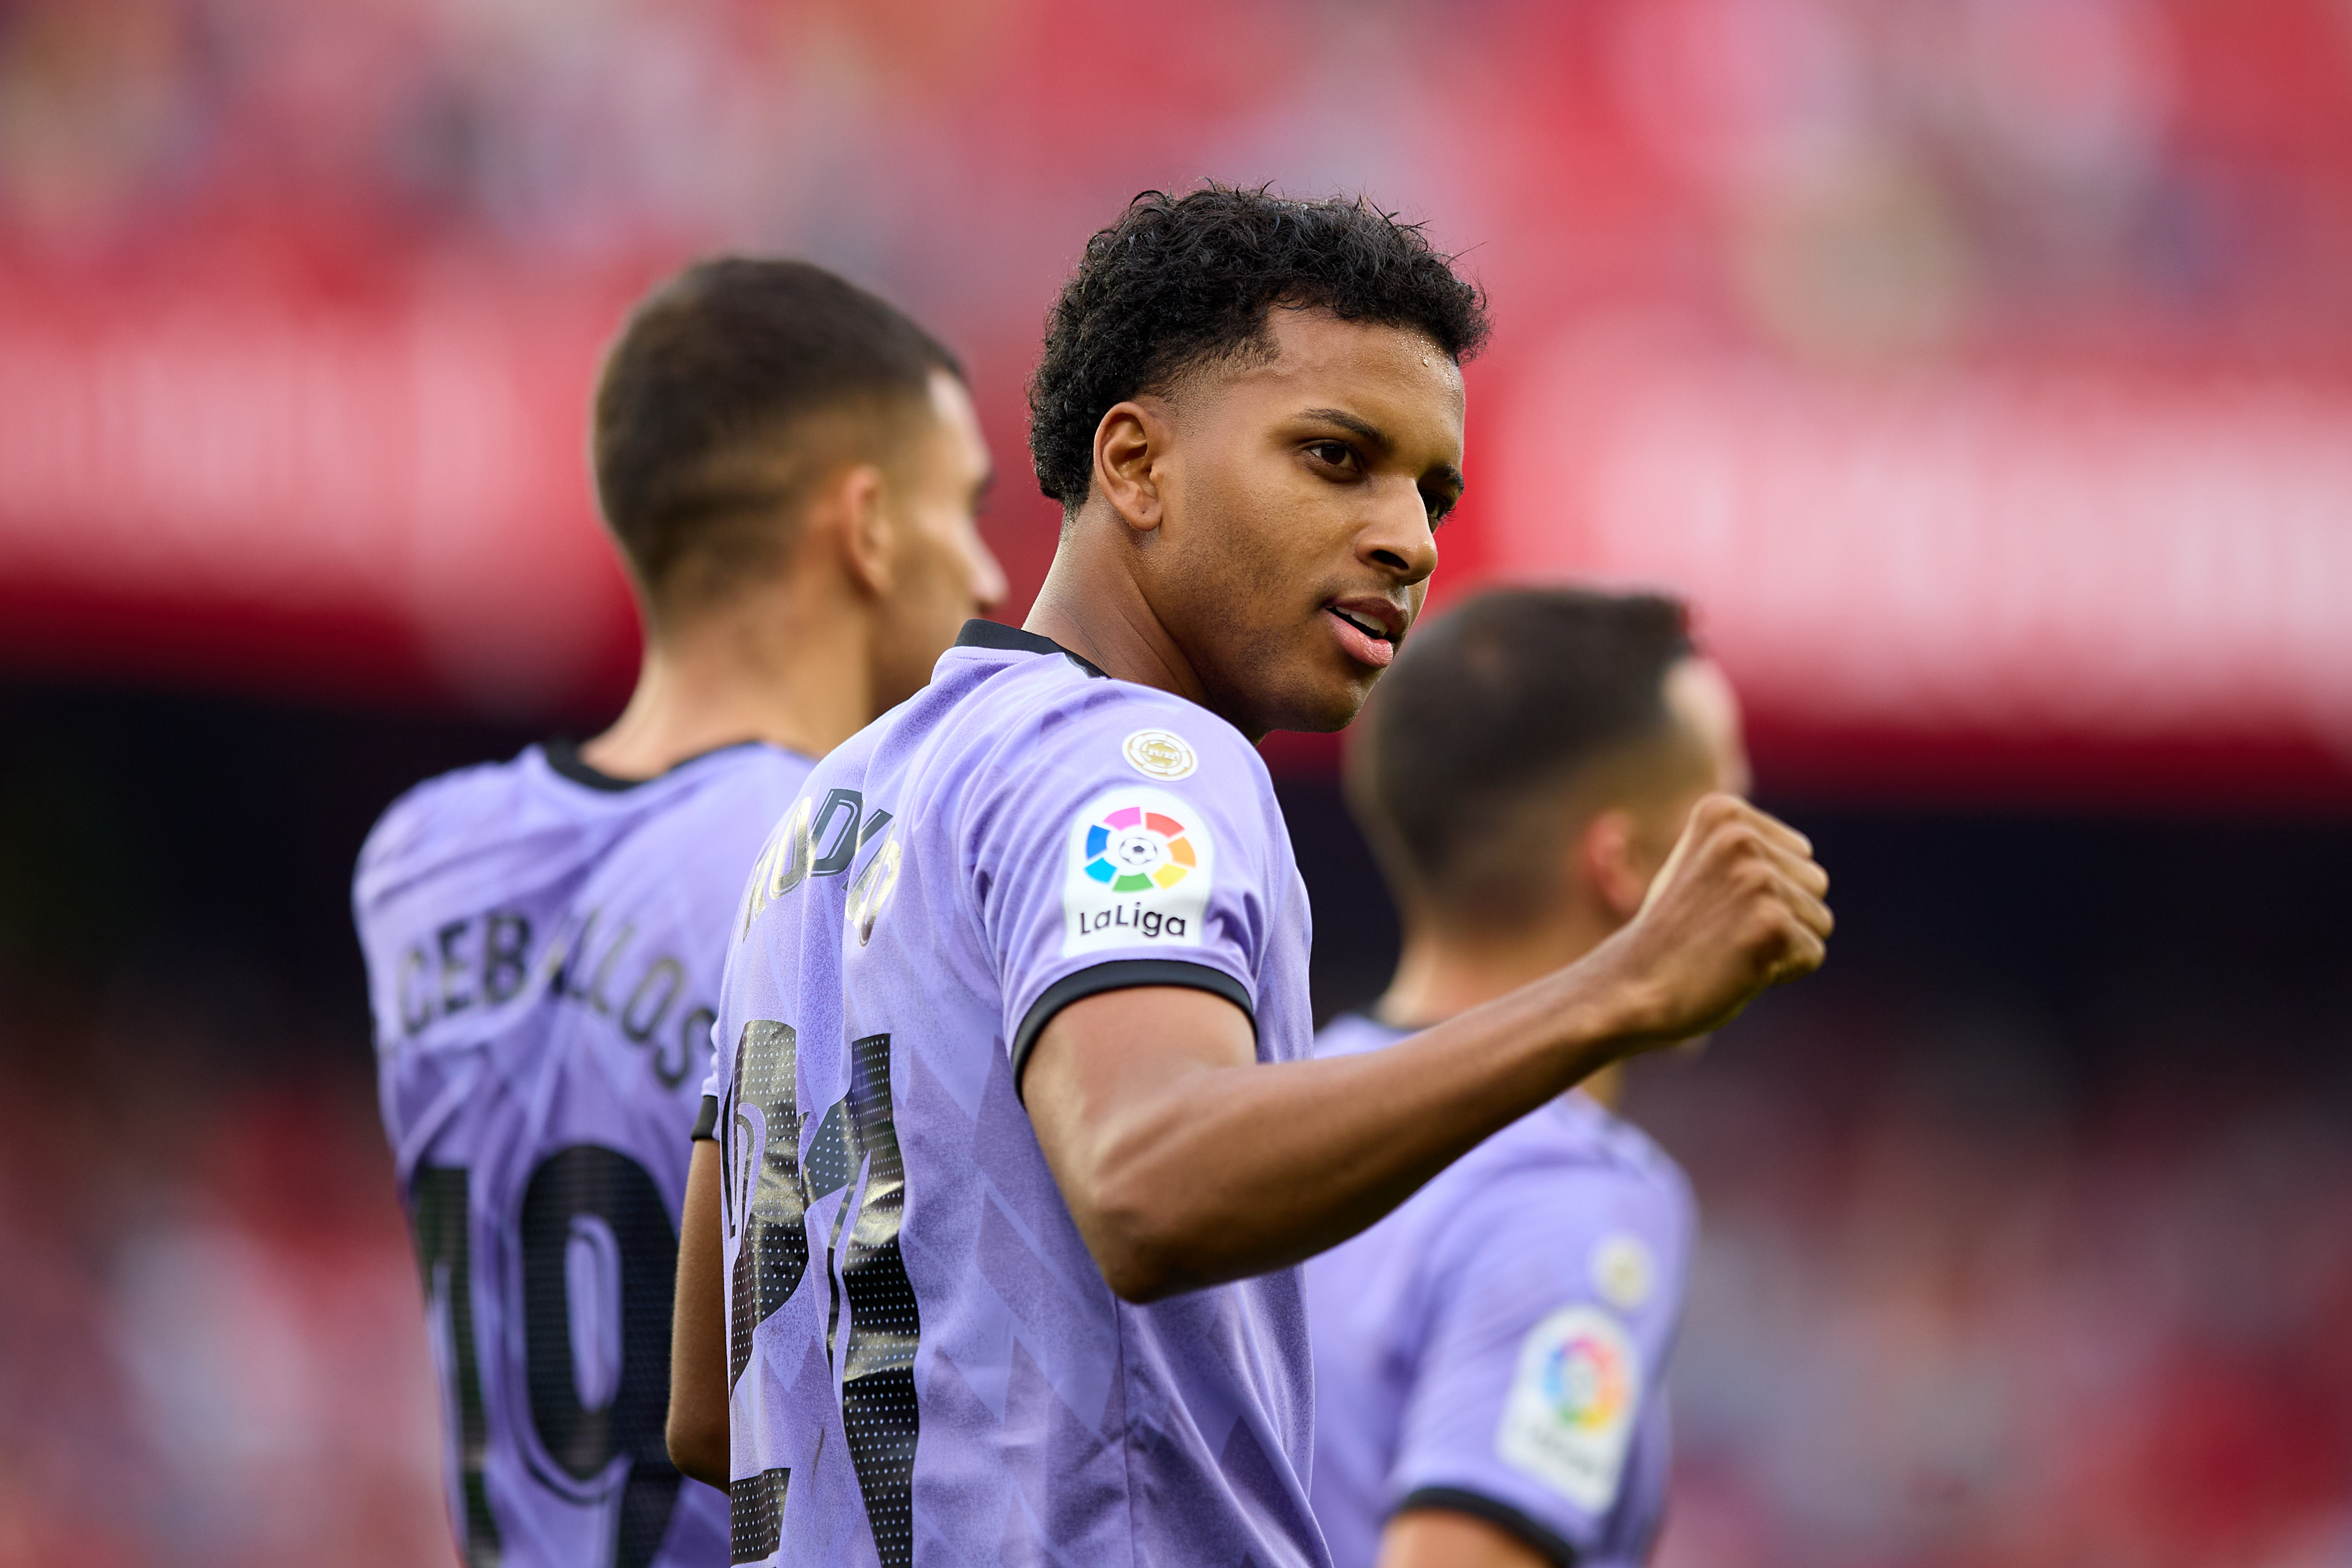 Rodrygo free-kick in Real Madrid win over Sevilla suggests pecking order is shifting